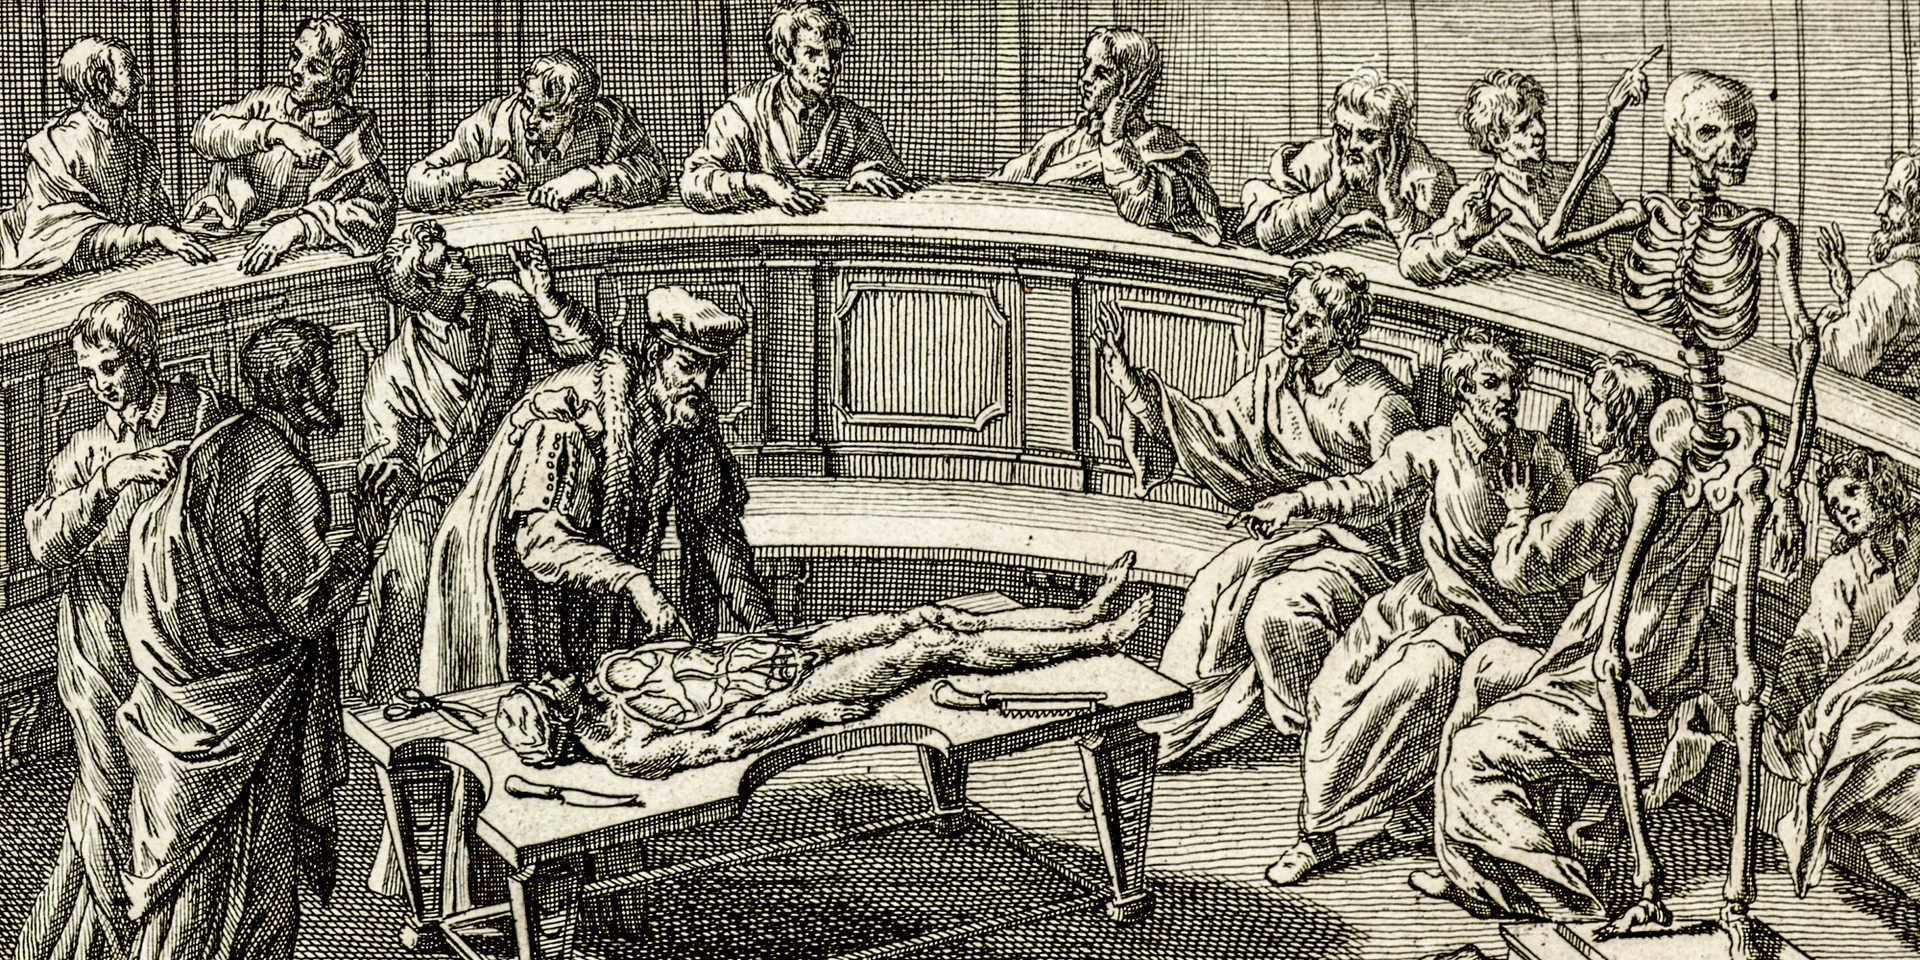 Illustration of a dissection of a cadaver with an audience